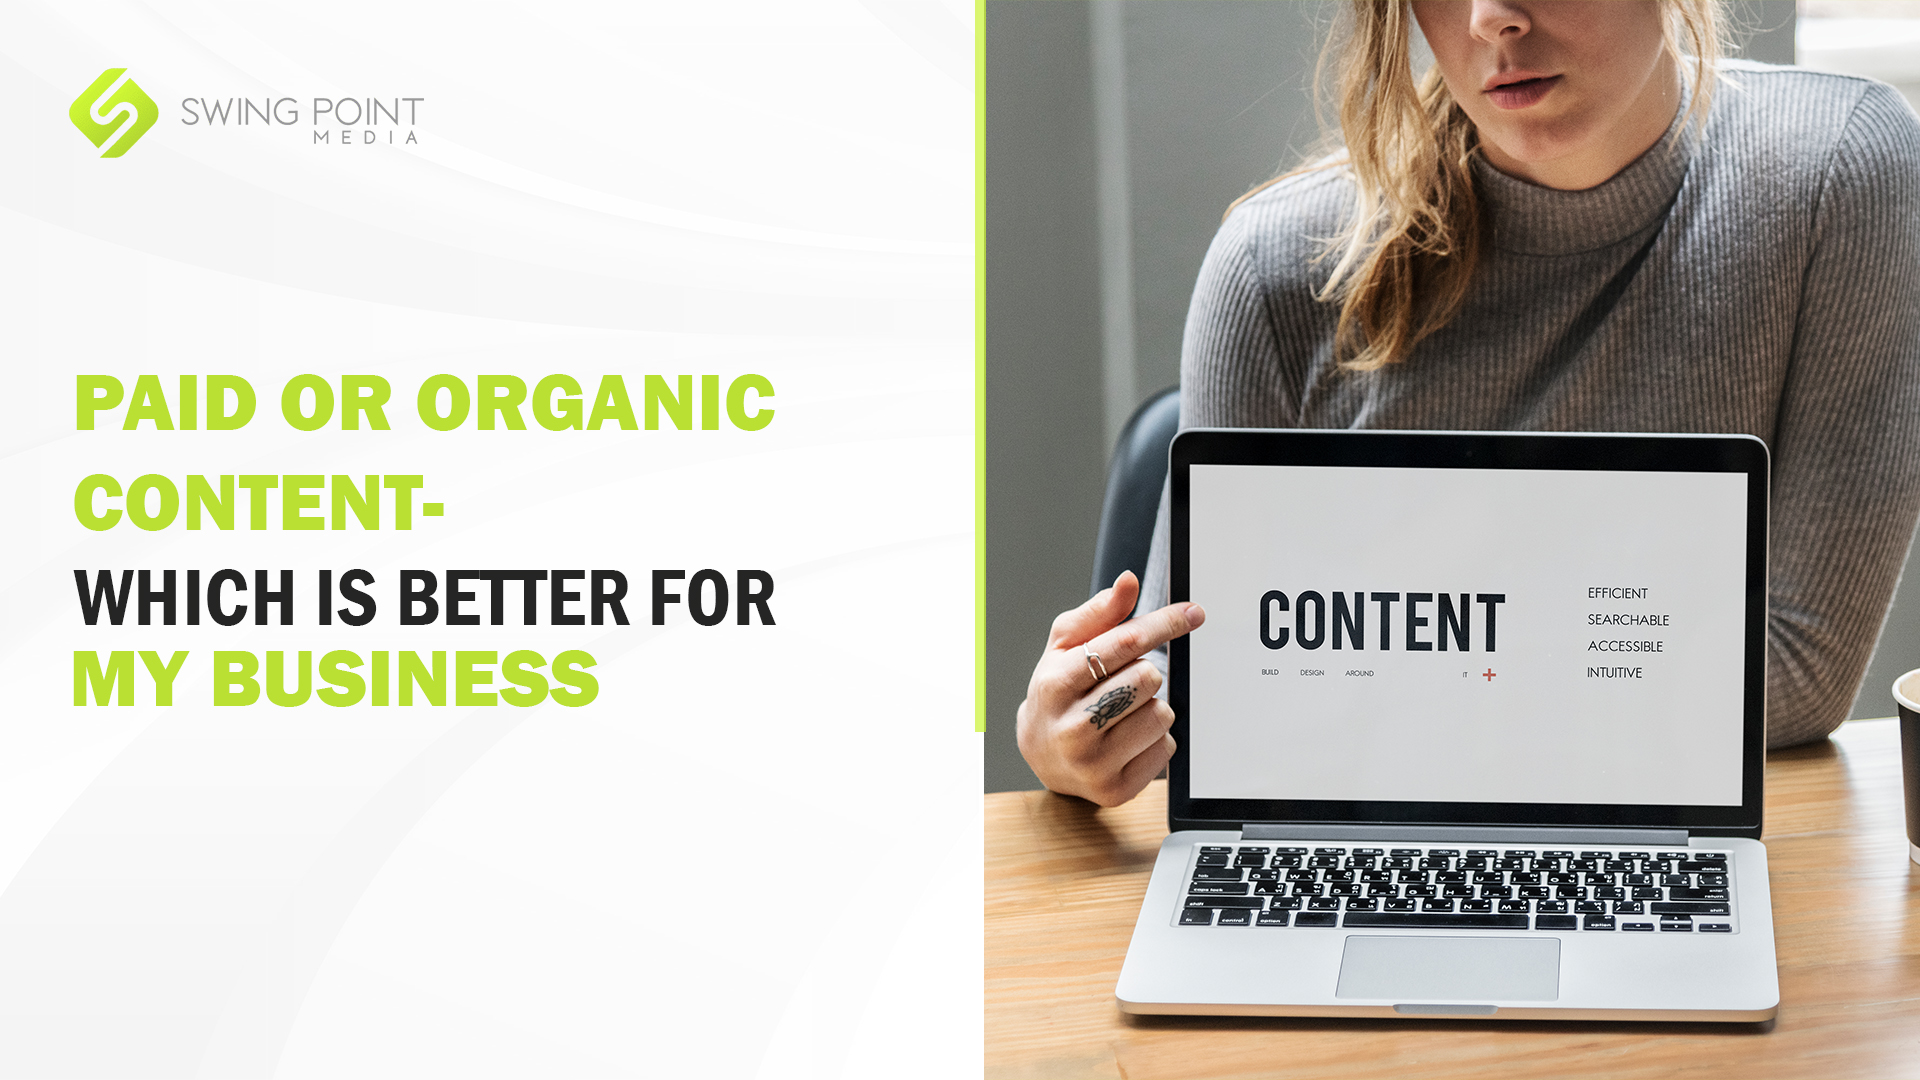 Paid or Organic Content for My Business